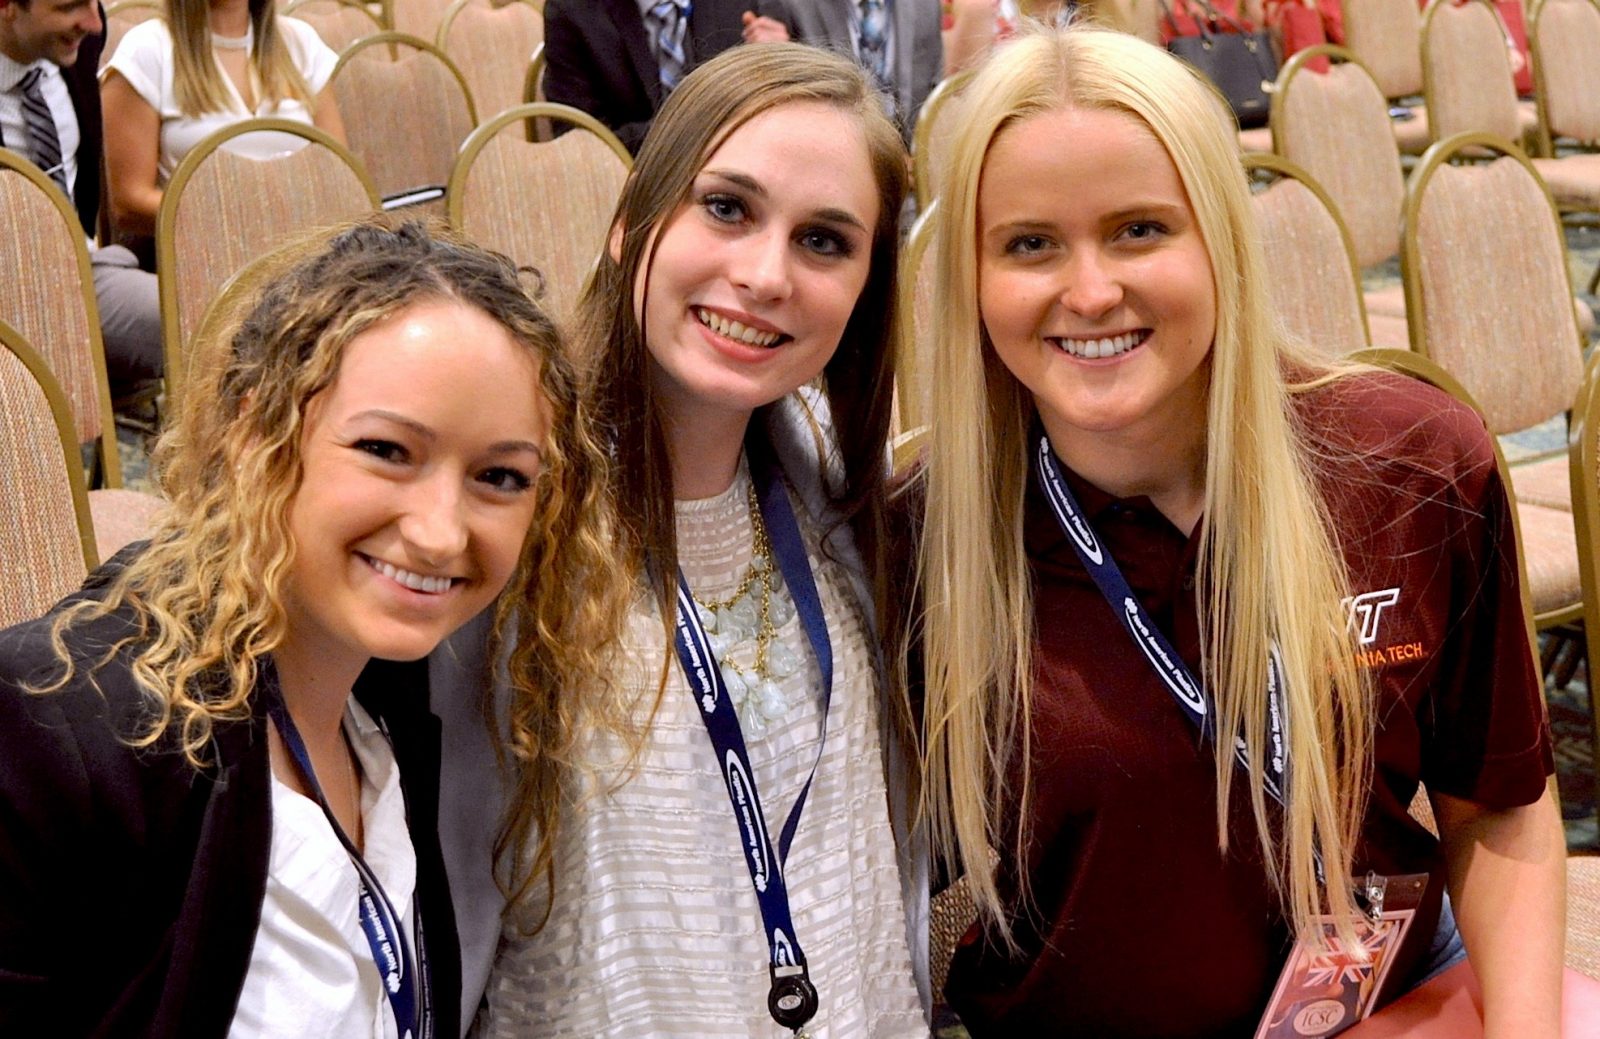 The 2019 Sales Competition Team competed in this year's International Collegiate Sales Competition held in Orlando, Florida (from left to right): Morgan Curington, Carrie Rock, and Taylor Buckner. 